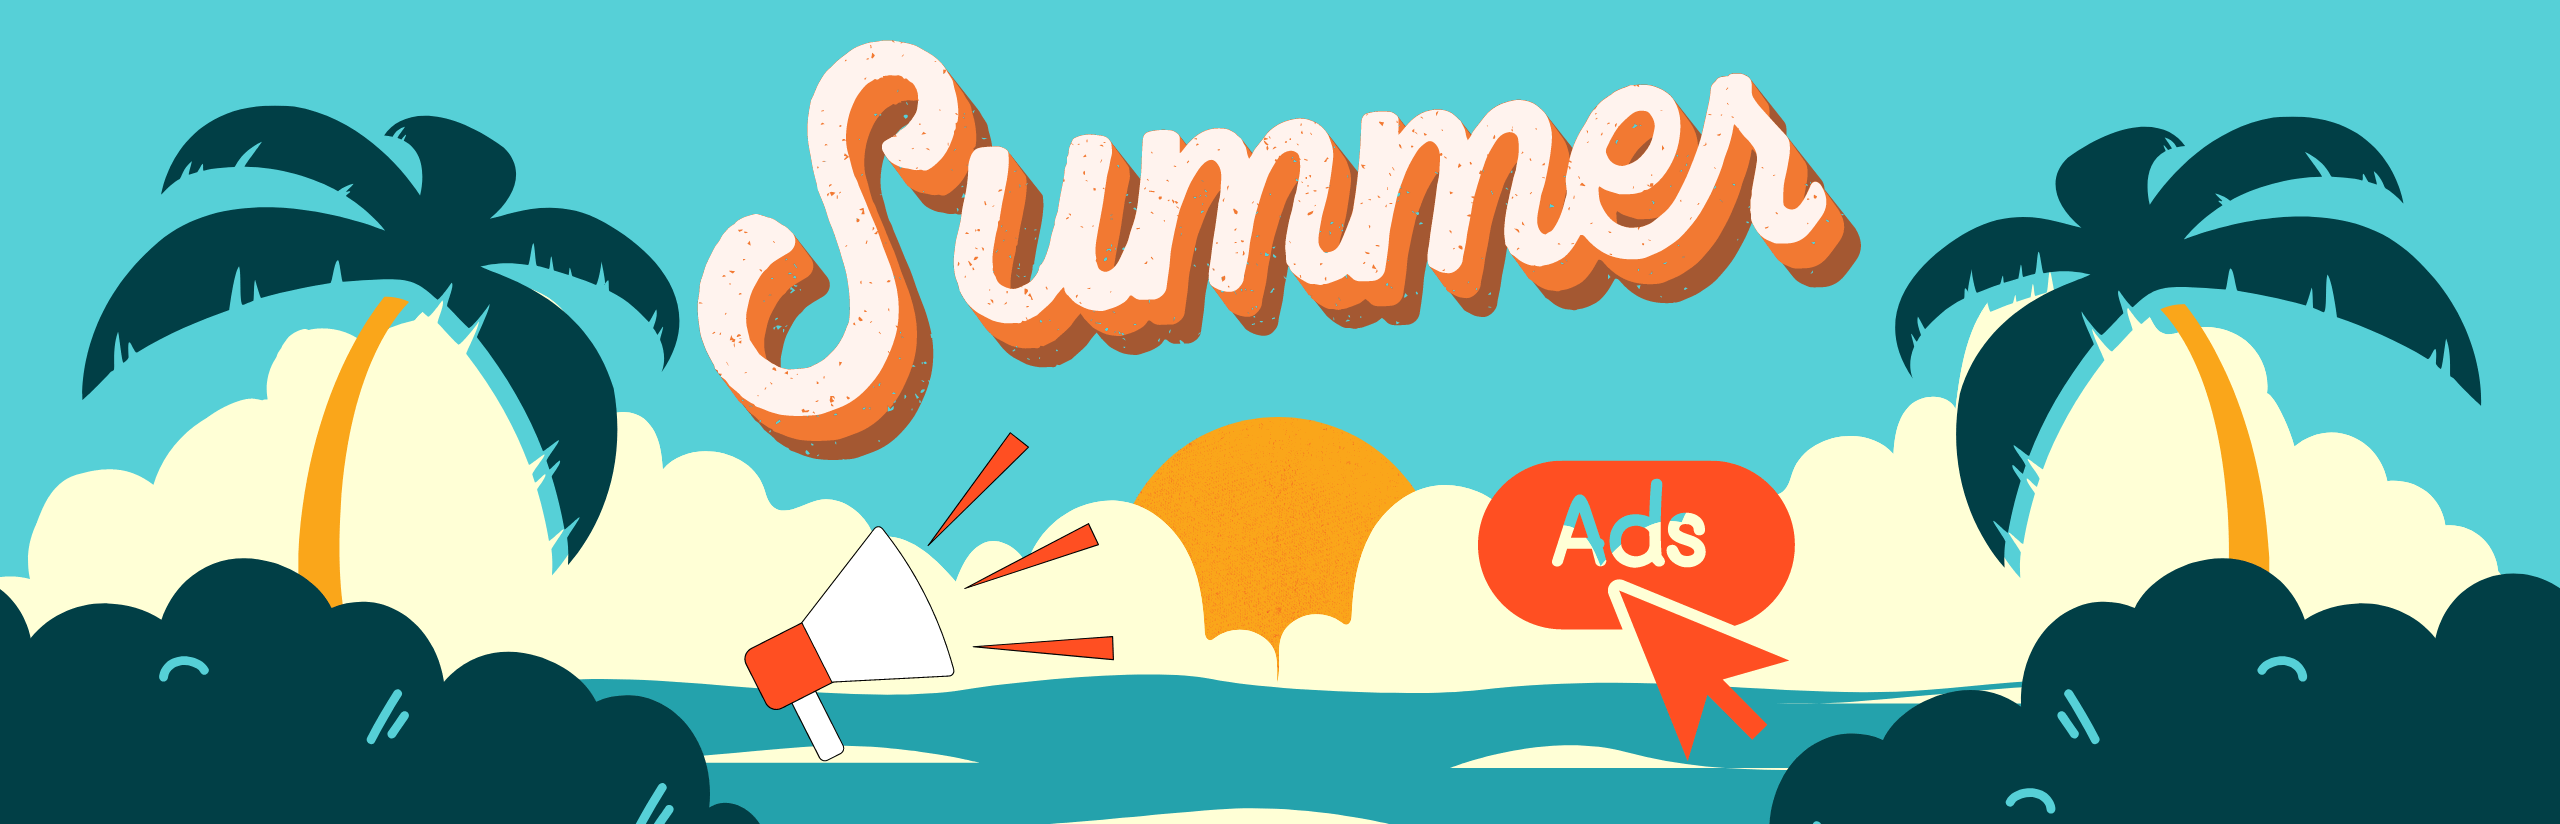 advertising in the summers summer advertising